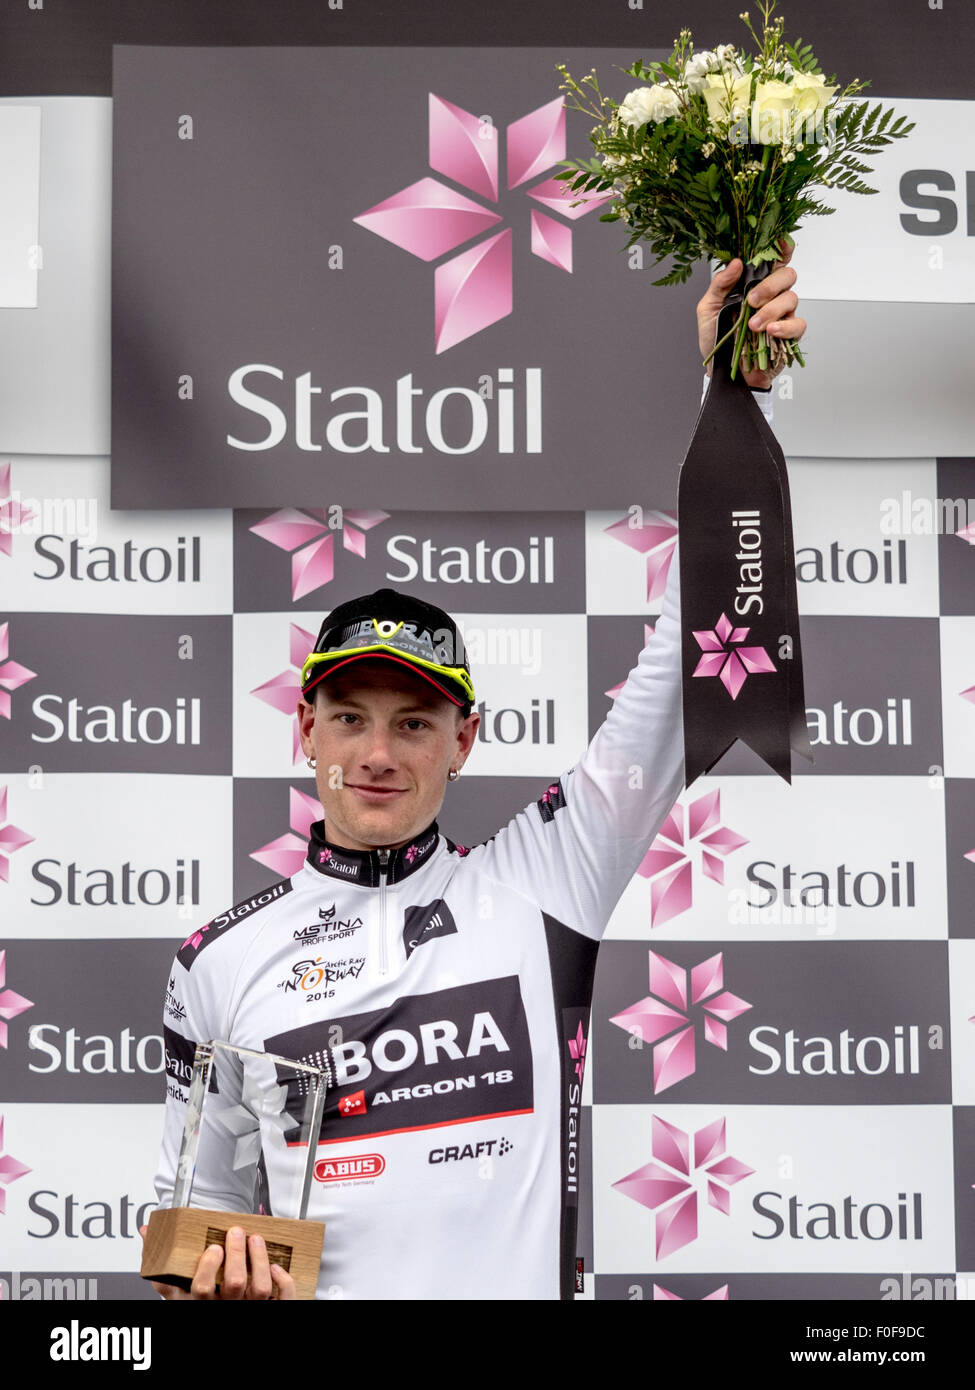 Setermoen, Norway. 14th August 2015. Sam Bennett from Ireland cycling for Bora-Argon 18 was awarded the white jersey for best young rider after the 2nd stage of Arctic Race of Norway 2015. The stage was 162,5km and started in Evenskjaer and ended in Setermoen. Sam Bennet was the winner of the 2nd stage. Credit:  Ole Mathisen/Alamy Live News Stock Photo